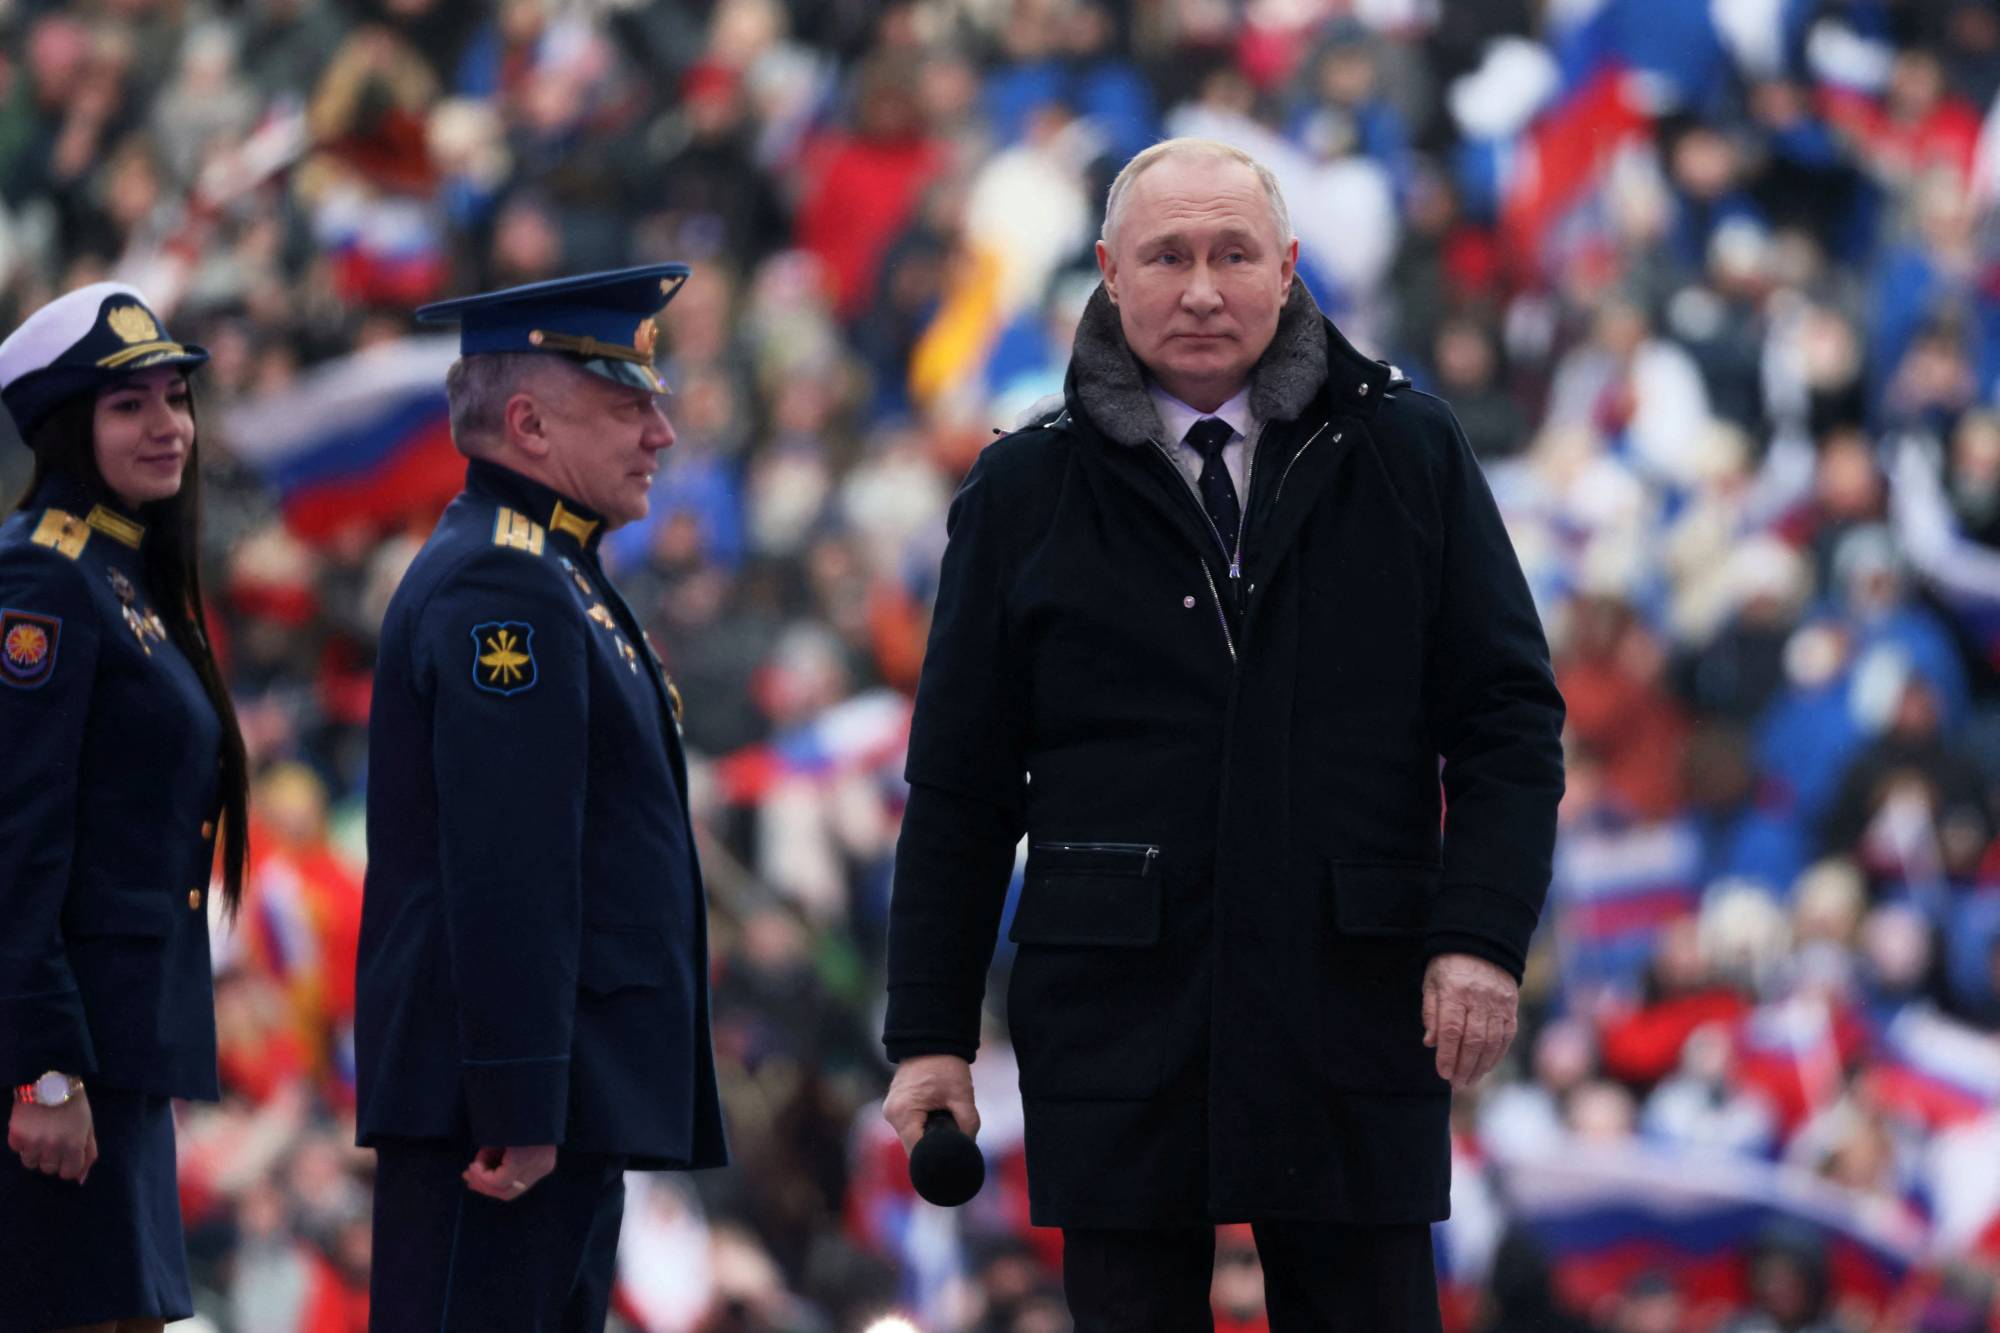 Putin's reckless Ukraine war has so weakened Moscow that he needs Xi to  bail him out